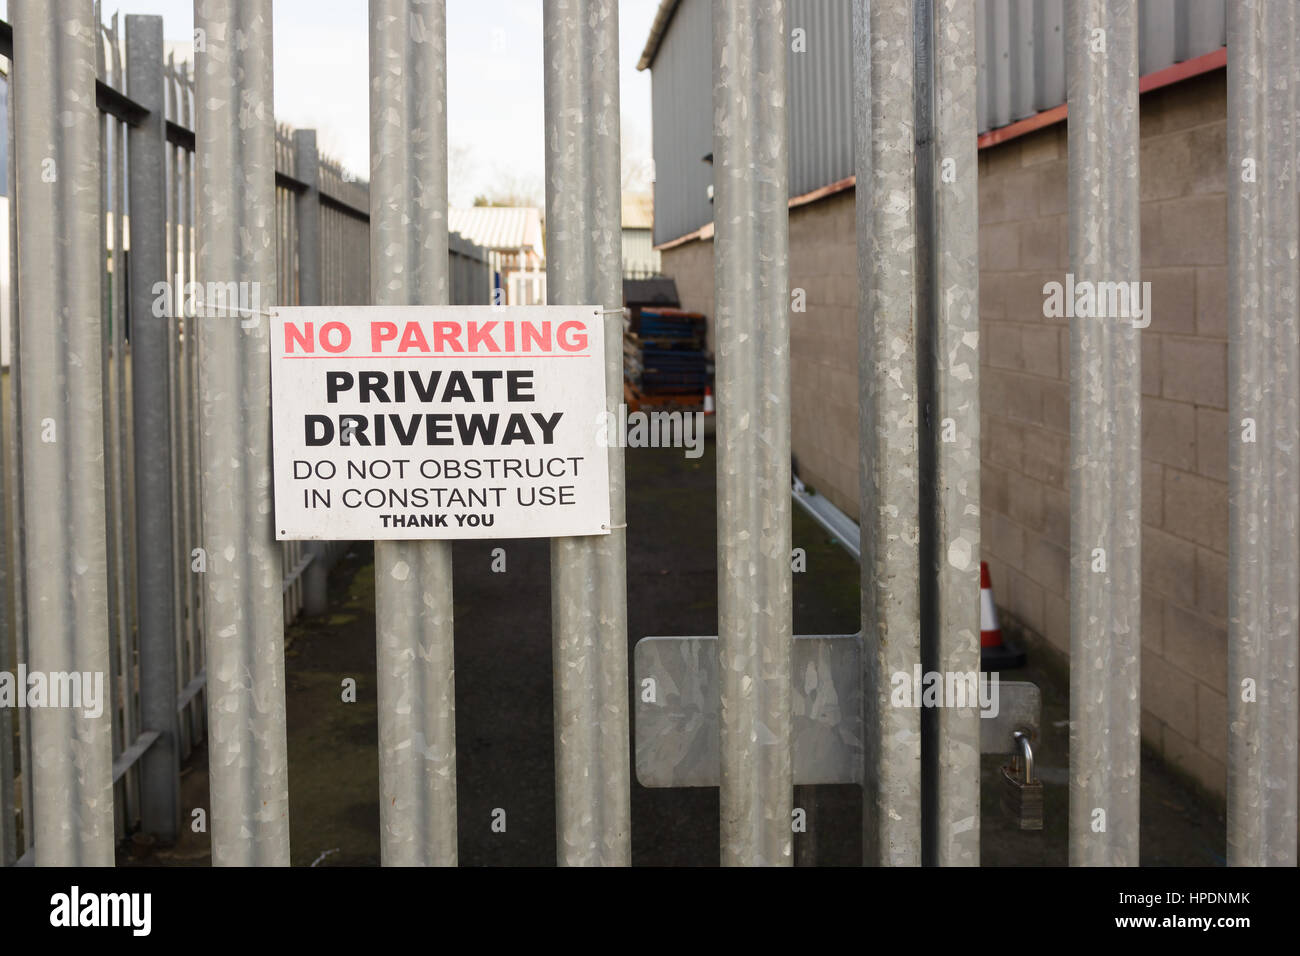 Set of locked security gates with a no parking sign at an industrial or commercial premises Stock Photo